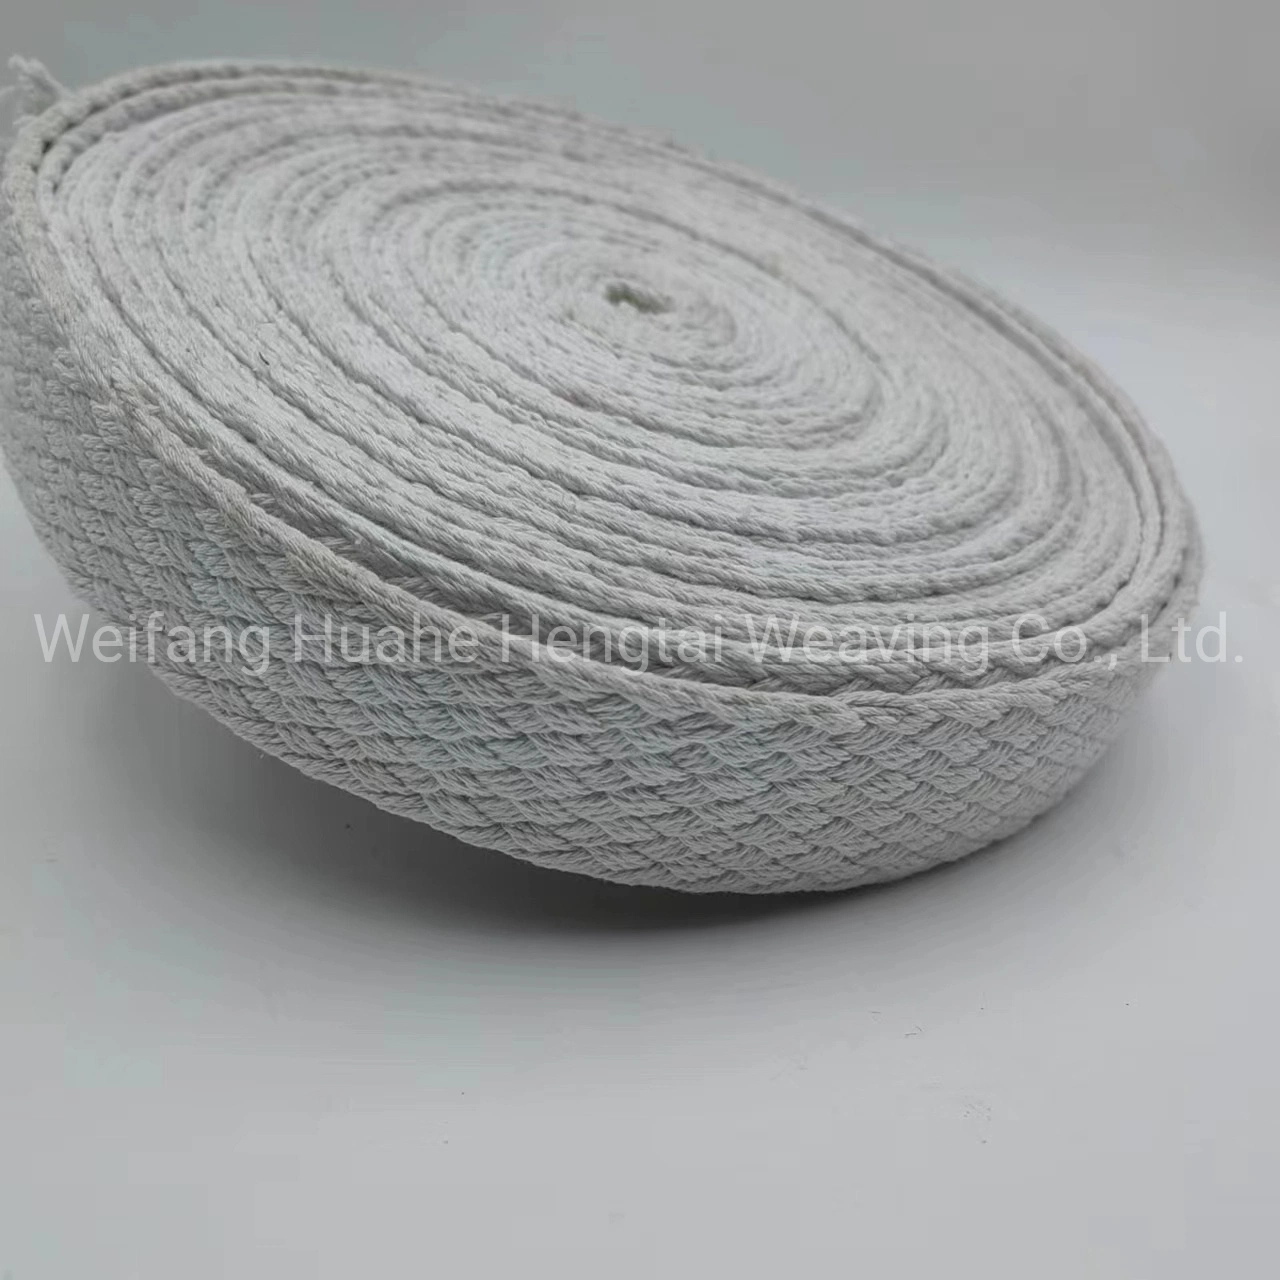 Polyester Webbing Accessories Can Be Used to Make Various Braided Belts